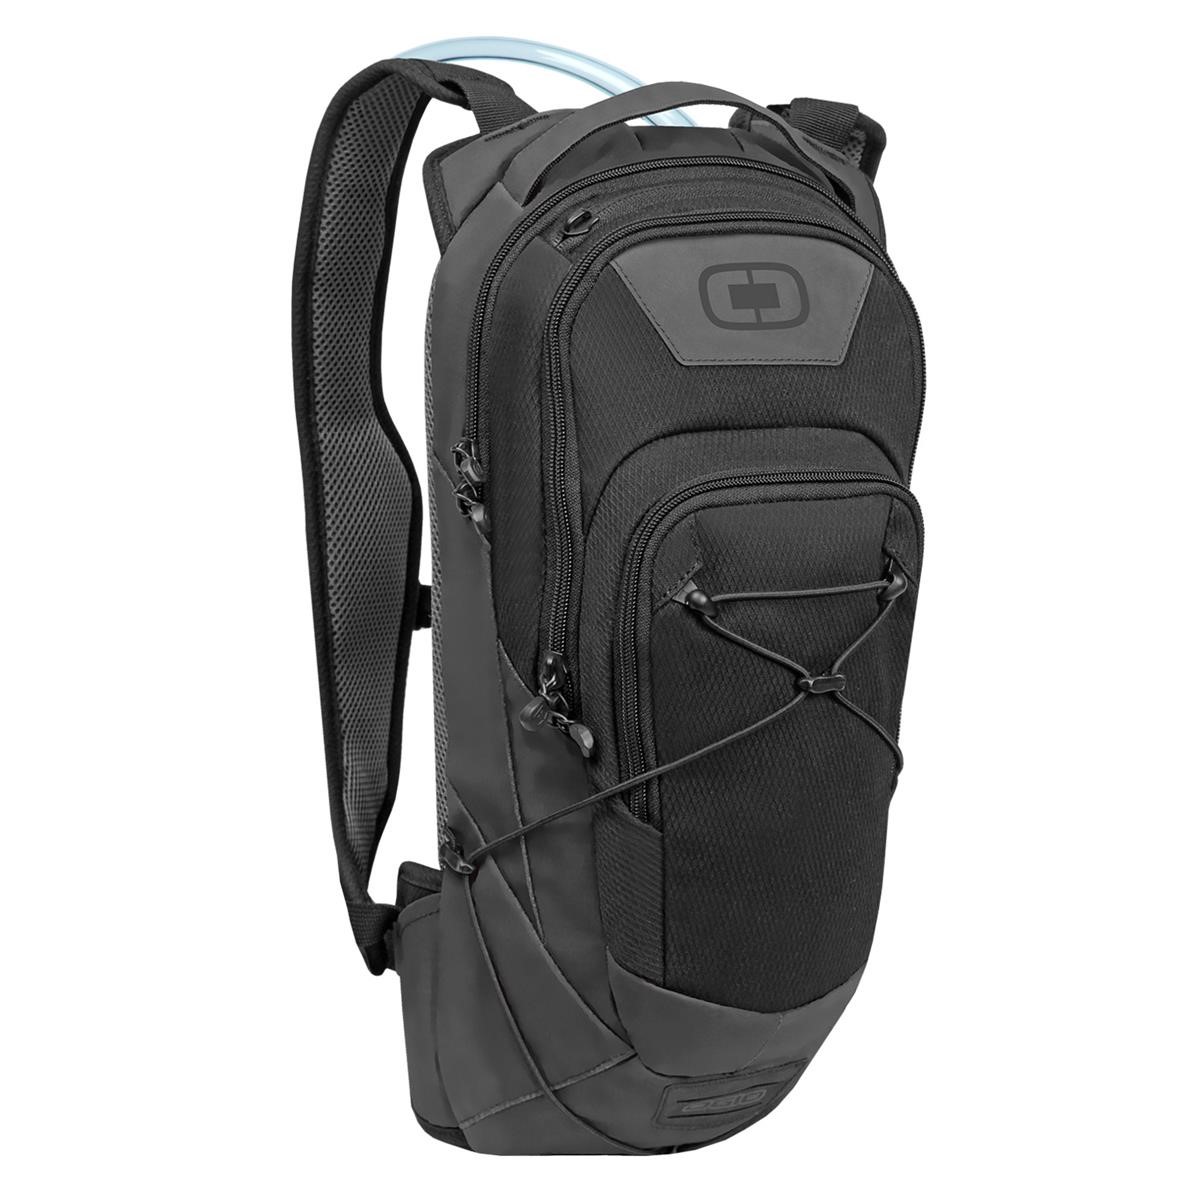 Ogio Hydration Pack Baja 70 Black Out, 2 Liters